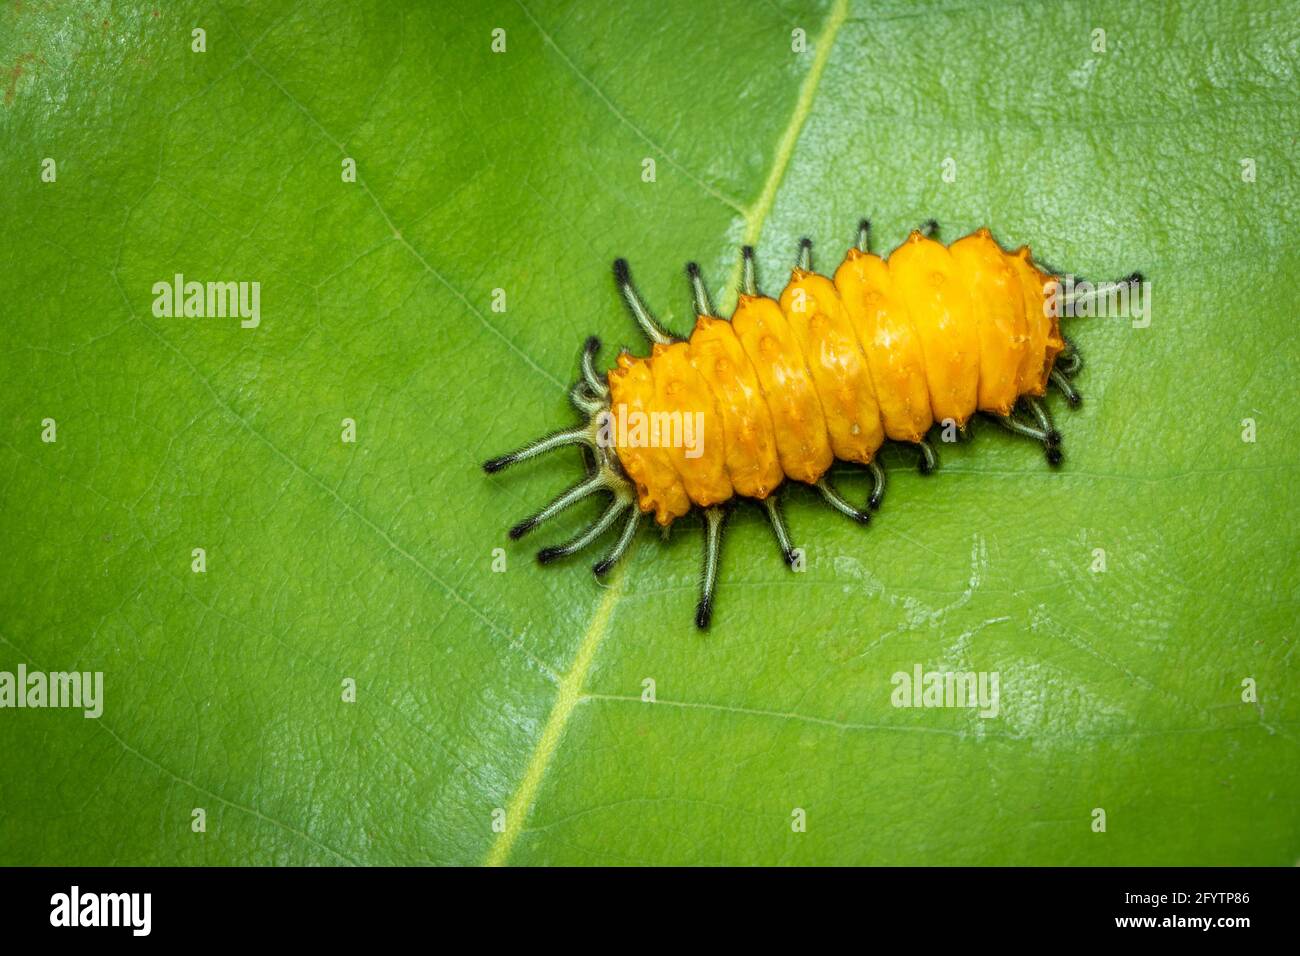 Image of an amber caterpillar on green leaf on natural background. Insect. Animal. Stock Photo